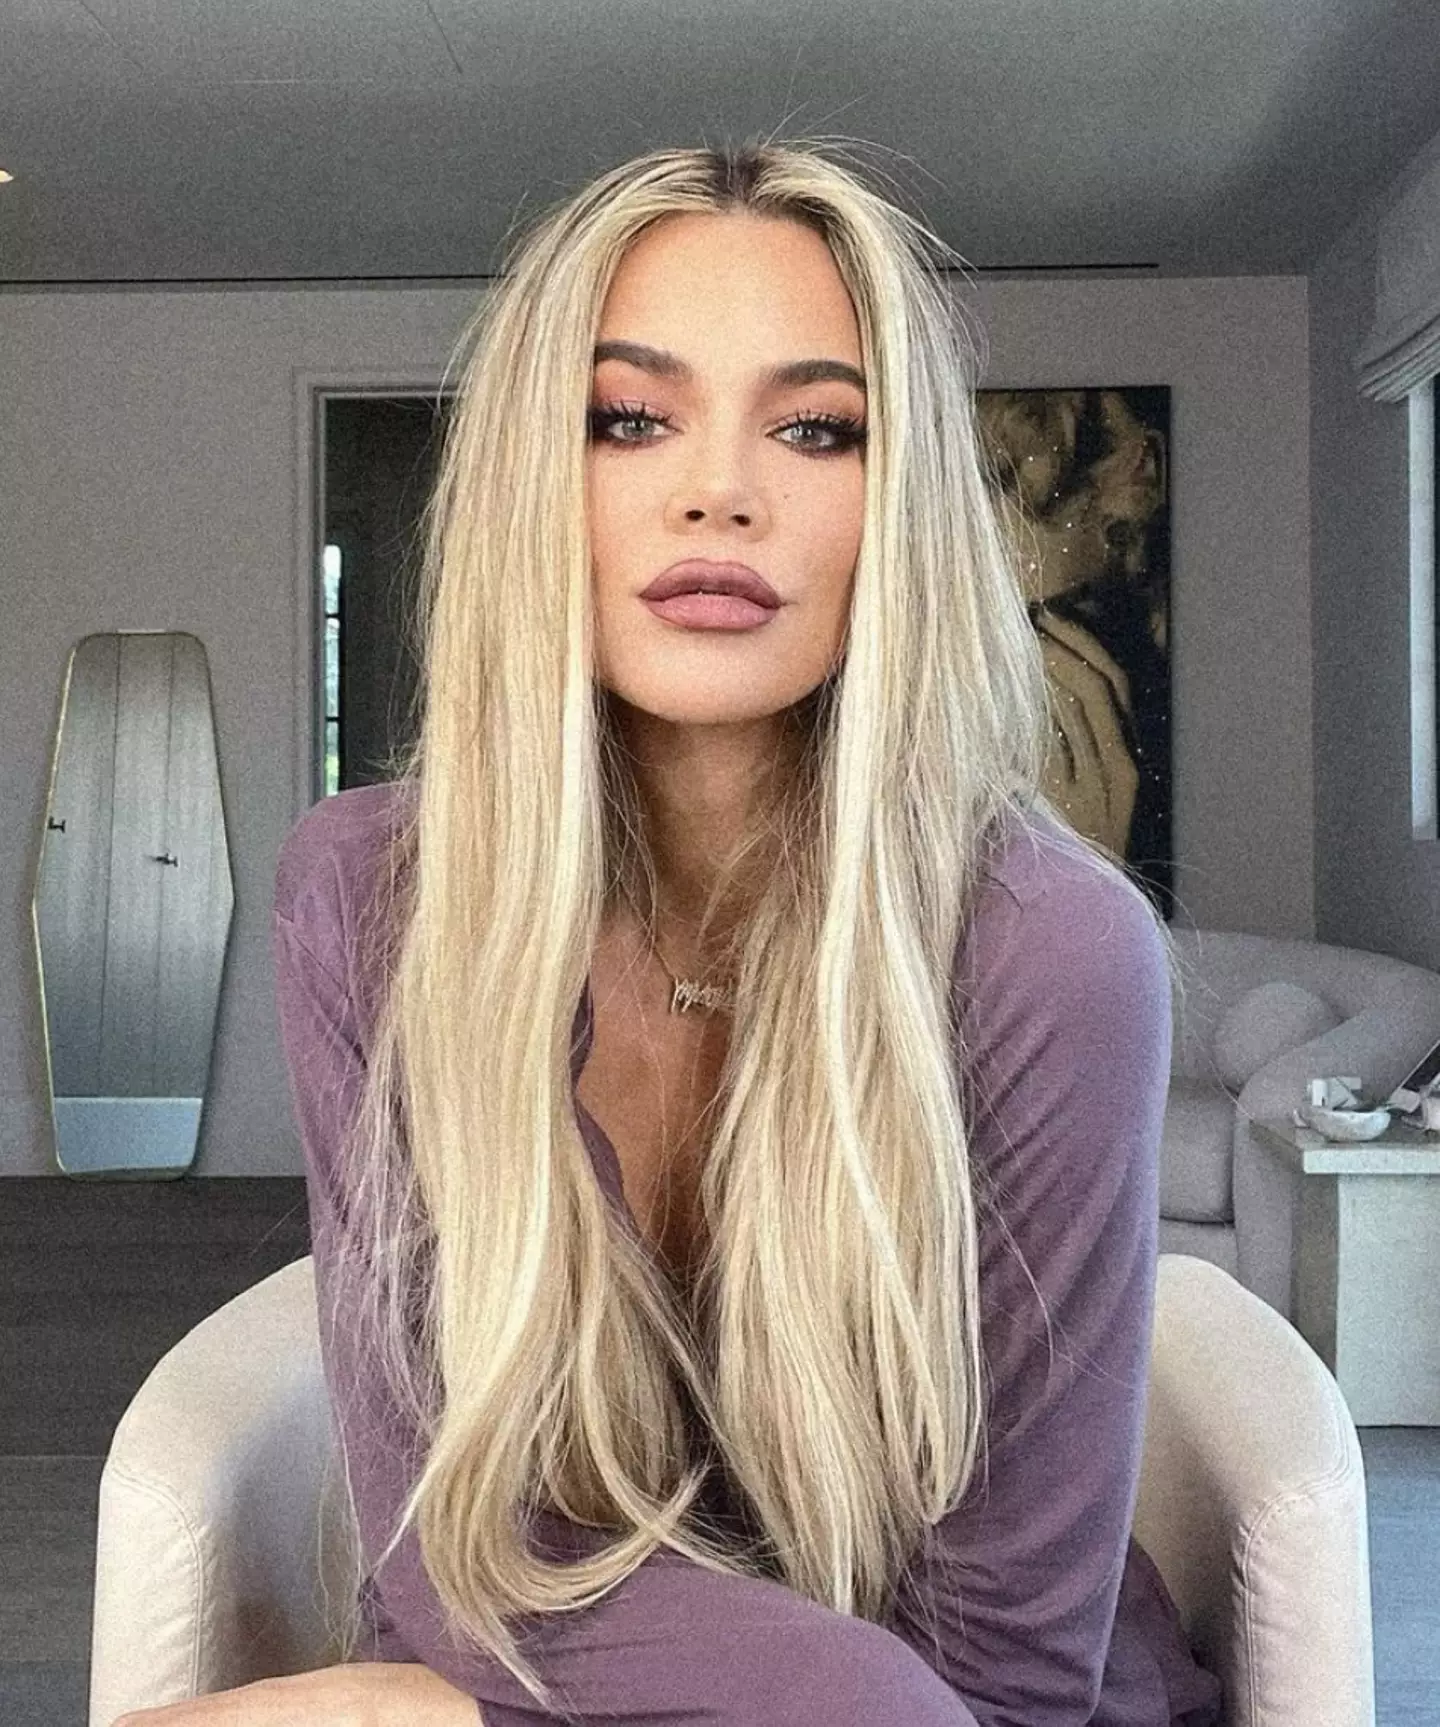 Khloe Kardashian shared a cryptic message on her Insta stories.